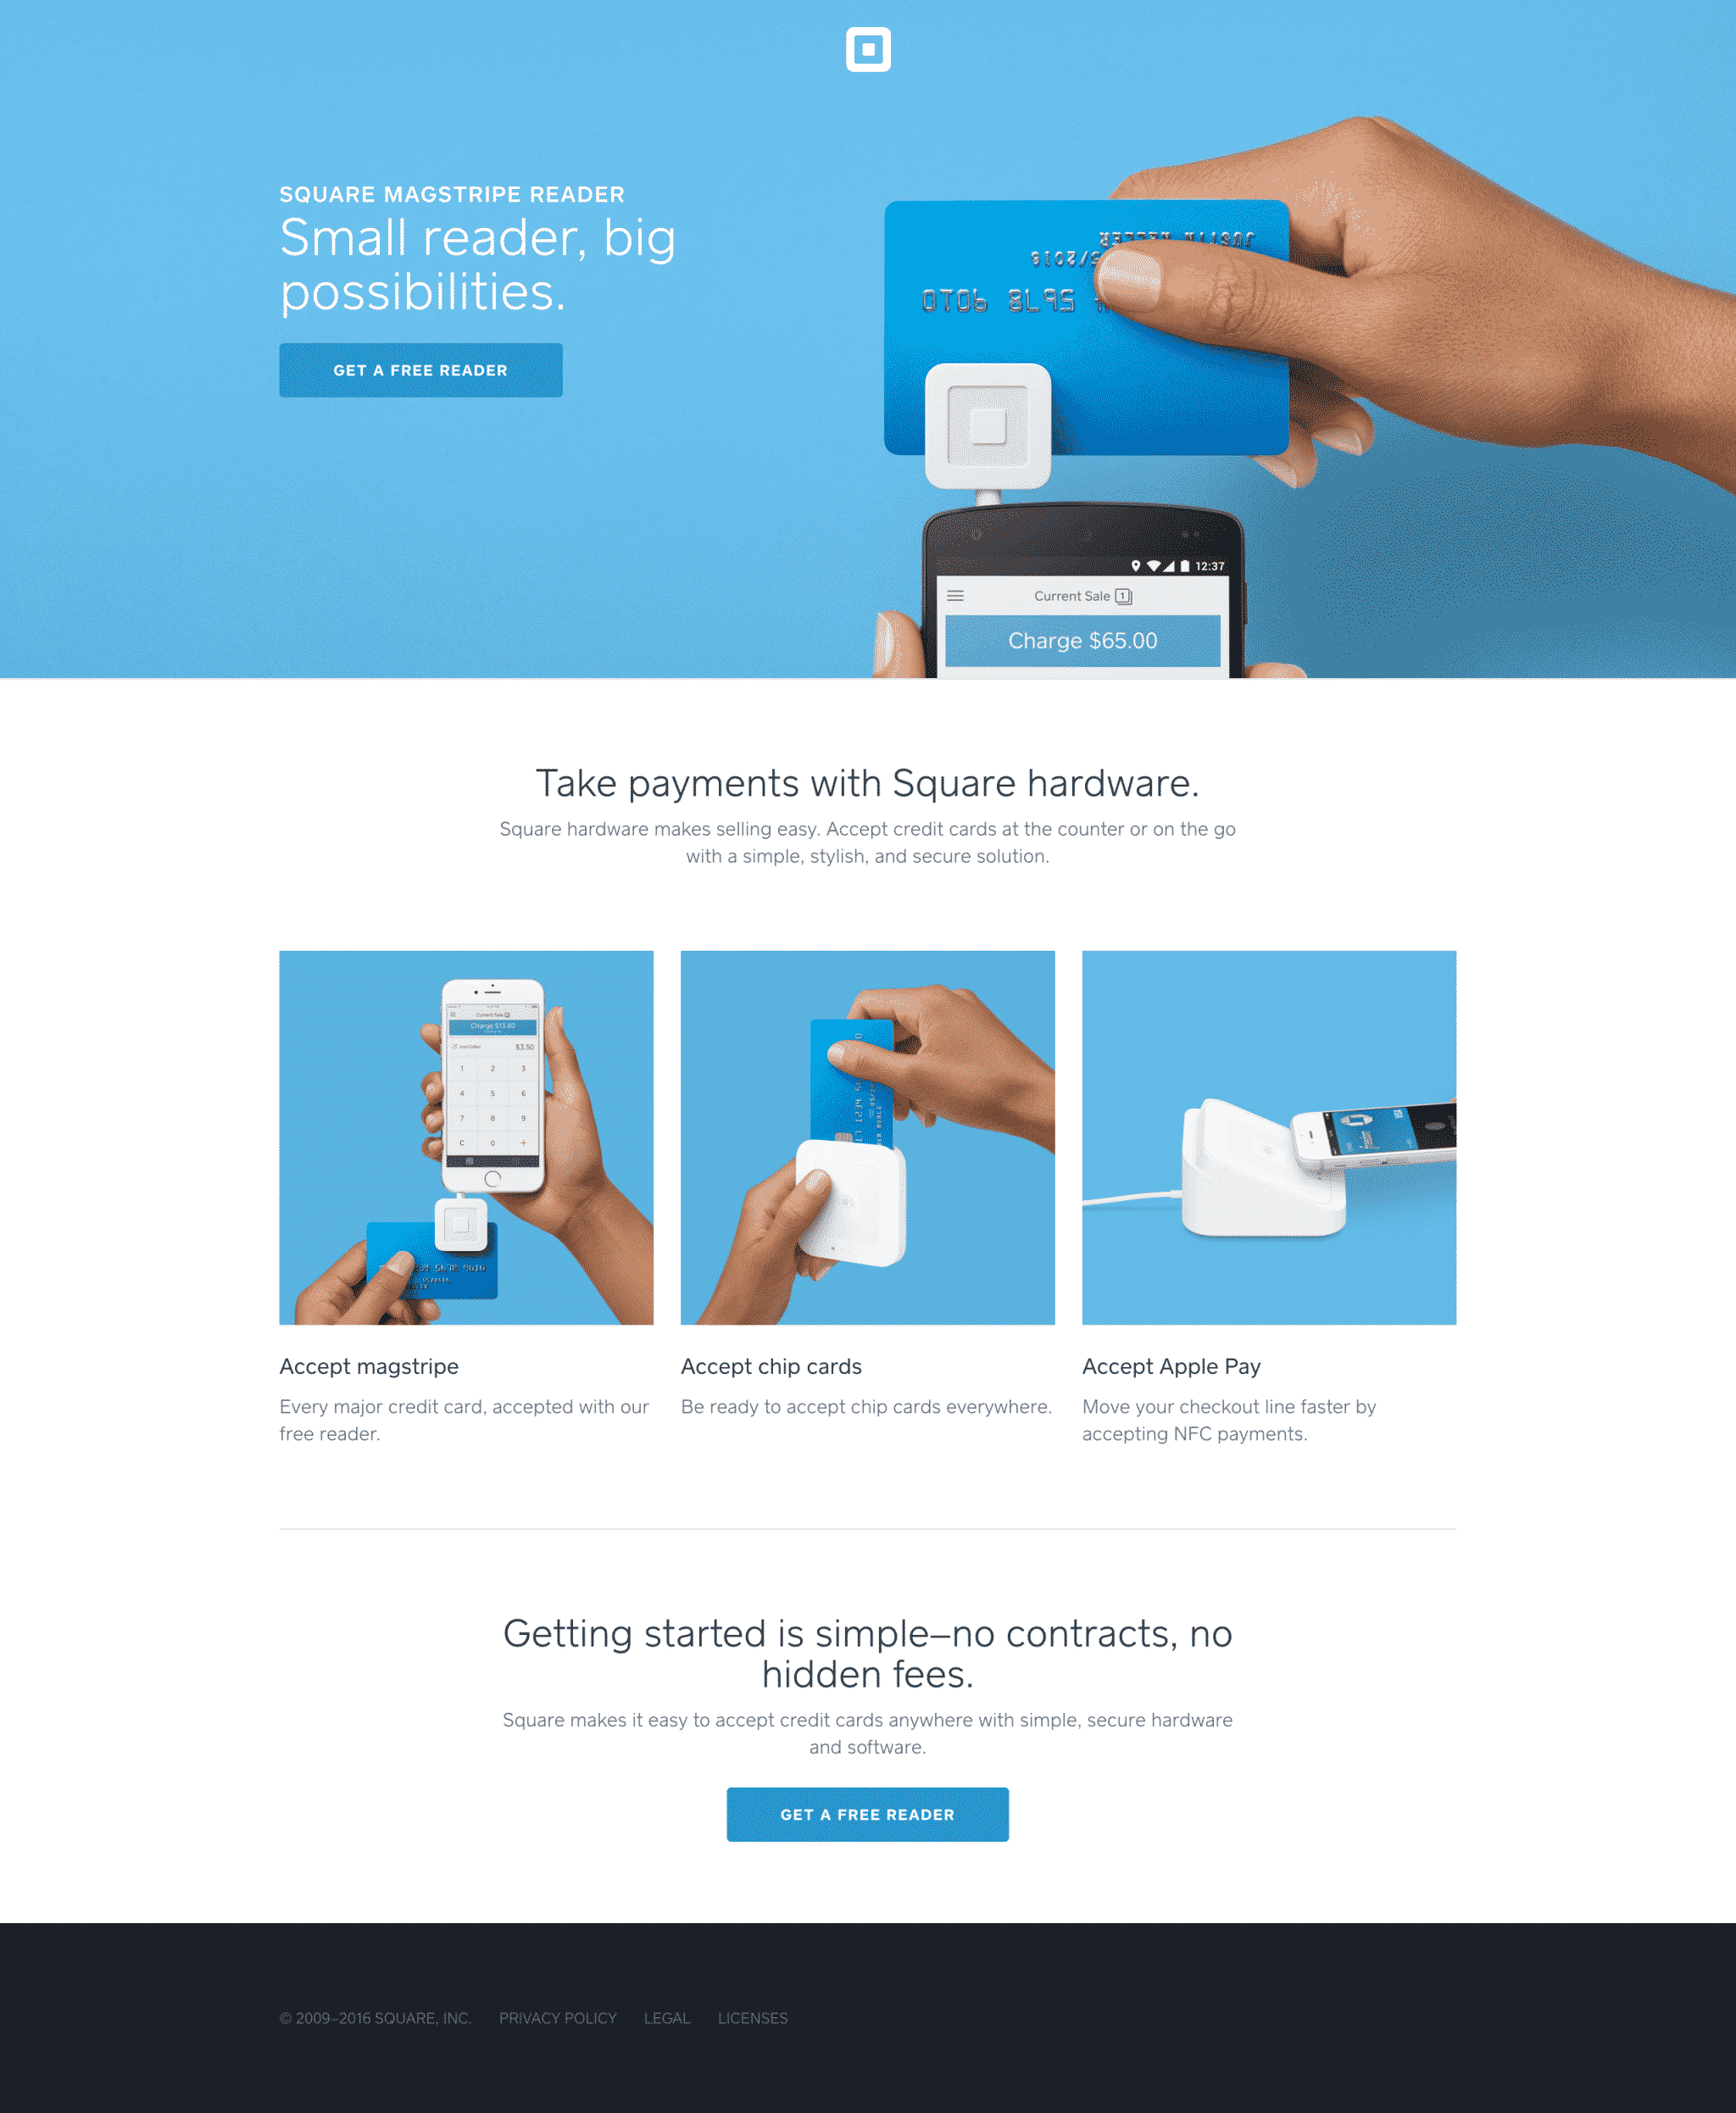 Square Does Not Use a Long Landing Page | Disruptive Advertising